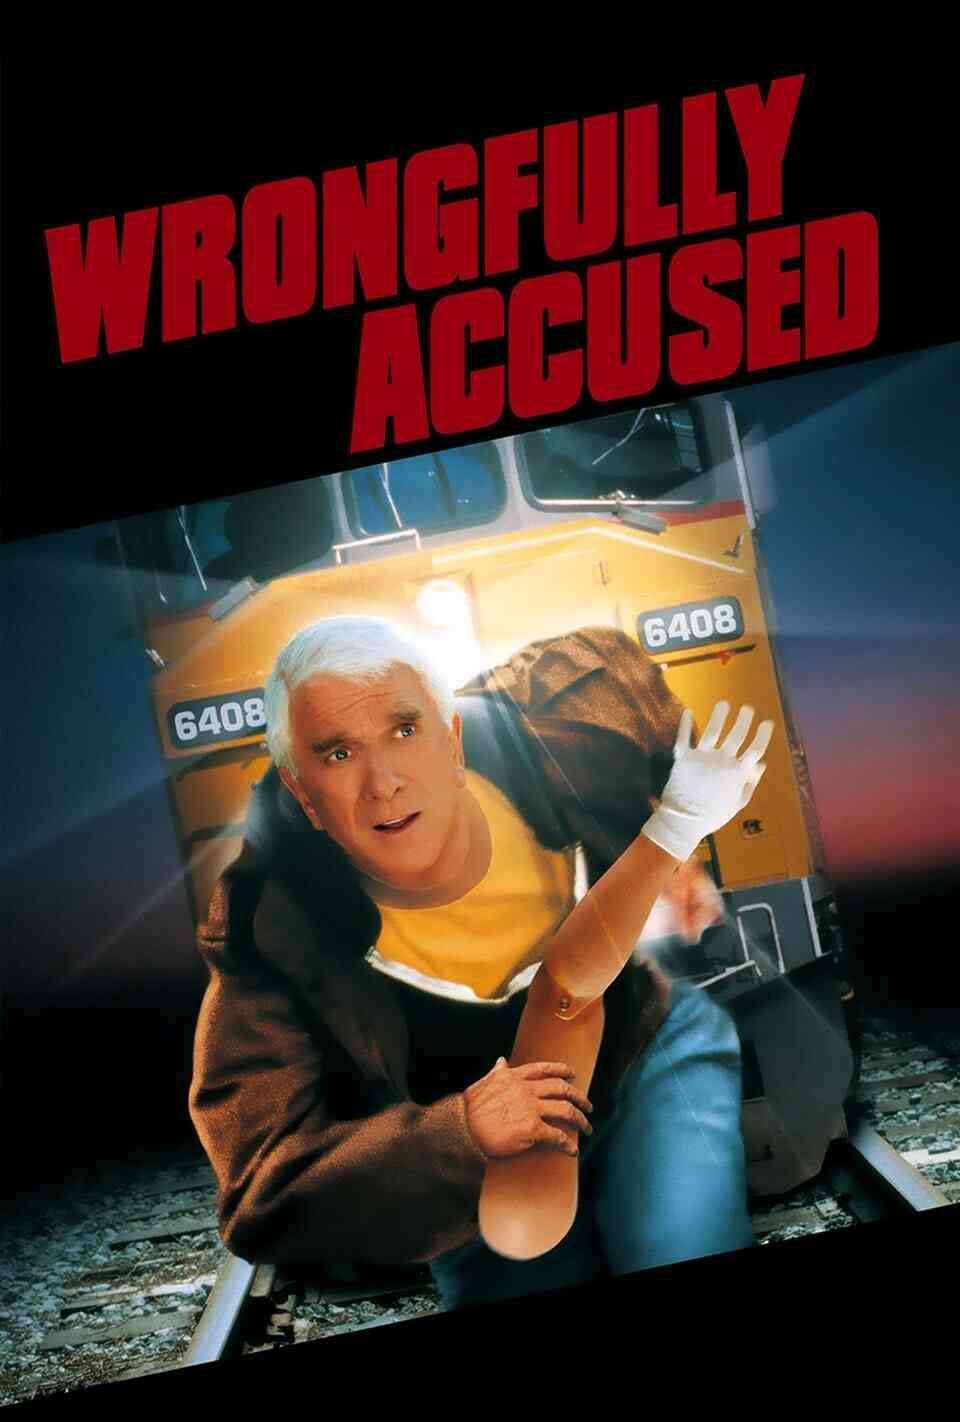 Read Wrongfully Accused screenplay (poster)